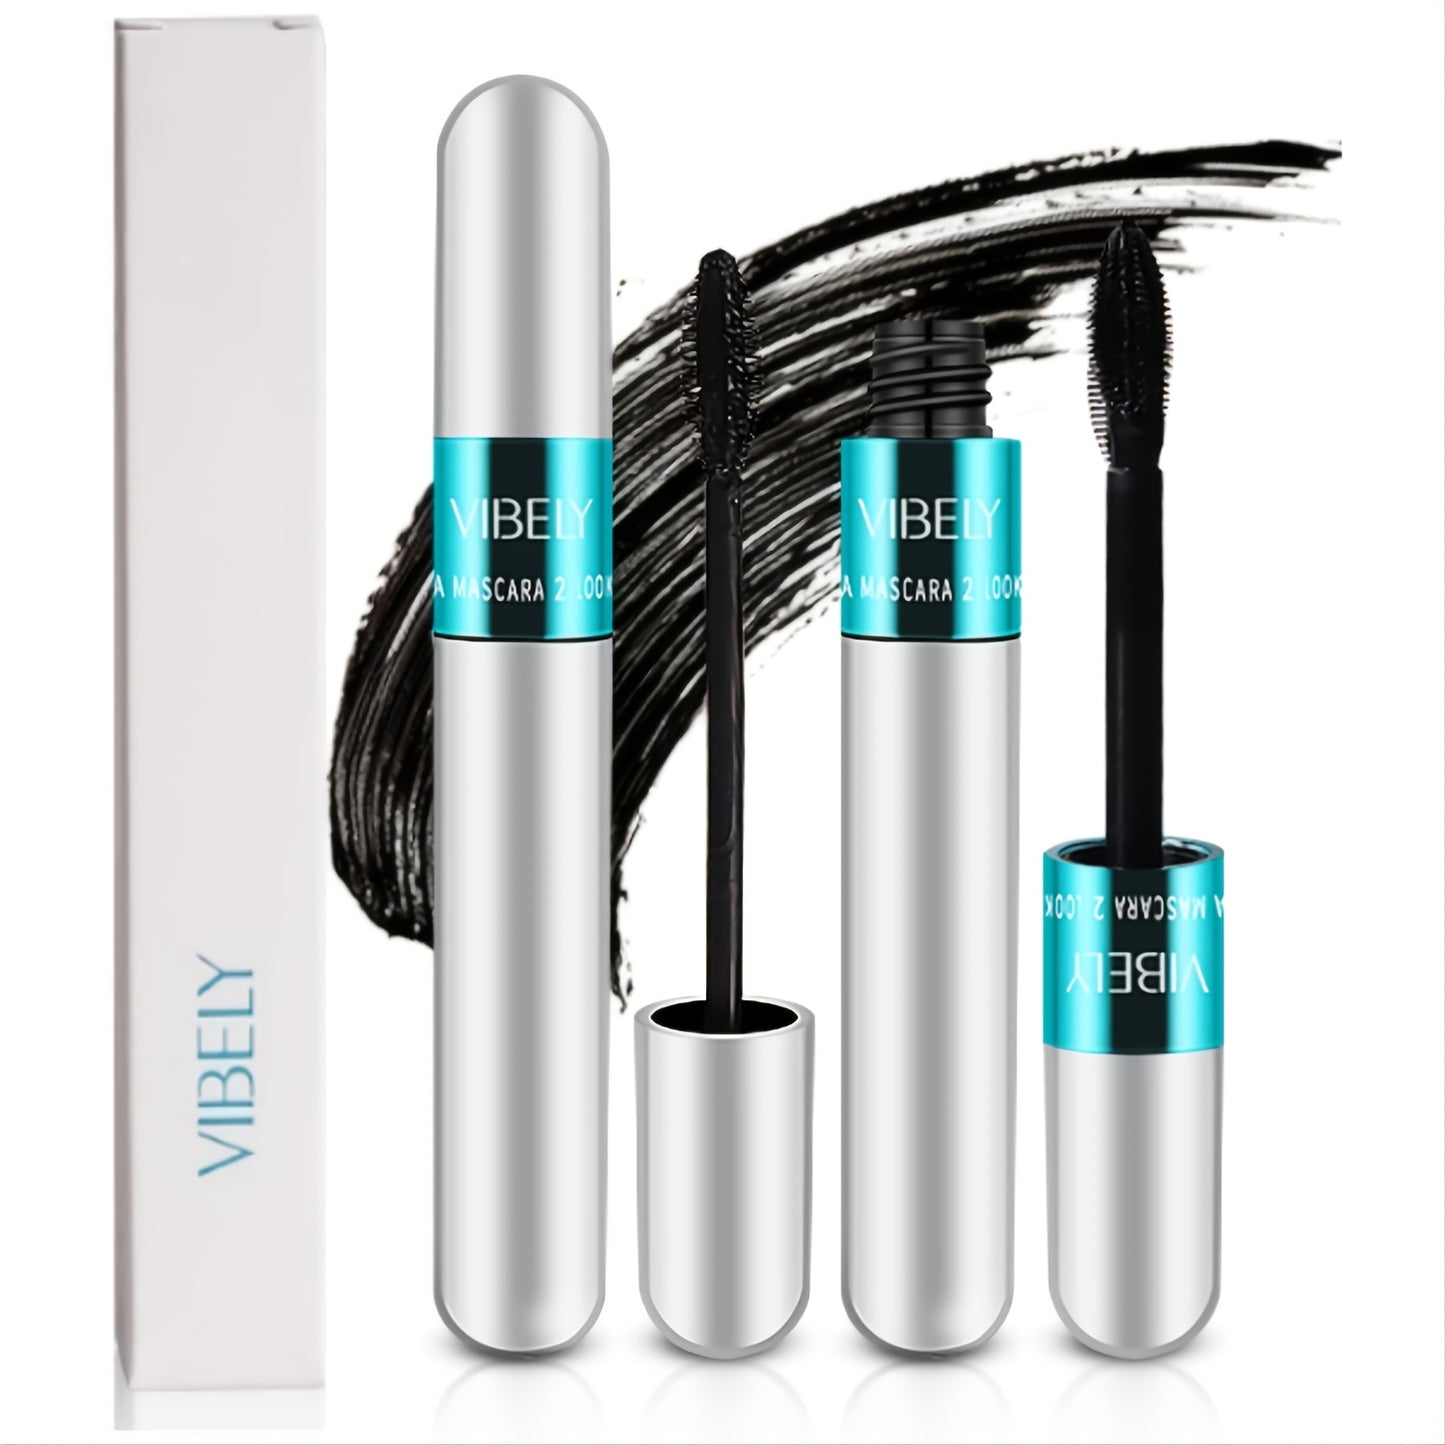 One free offer 4D Silk Fiber Mascara One free offer 4 pcs Waterproof Lashes with Natural Lengthening & Thickening - No Clumping